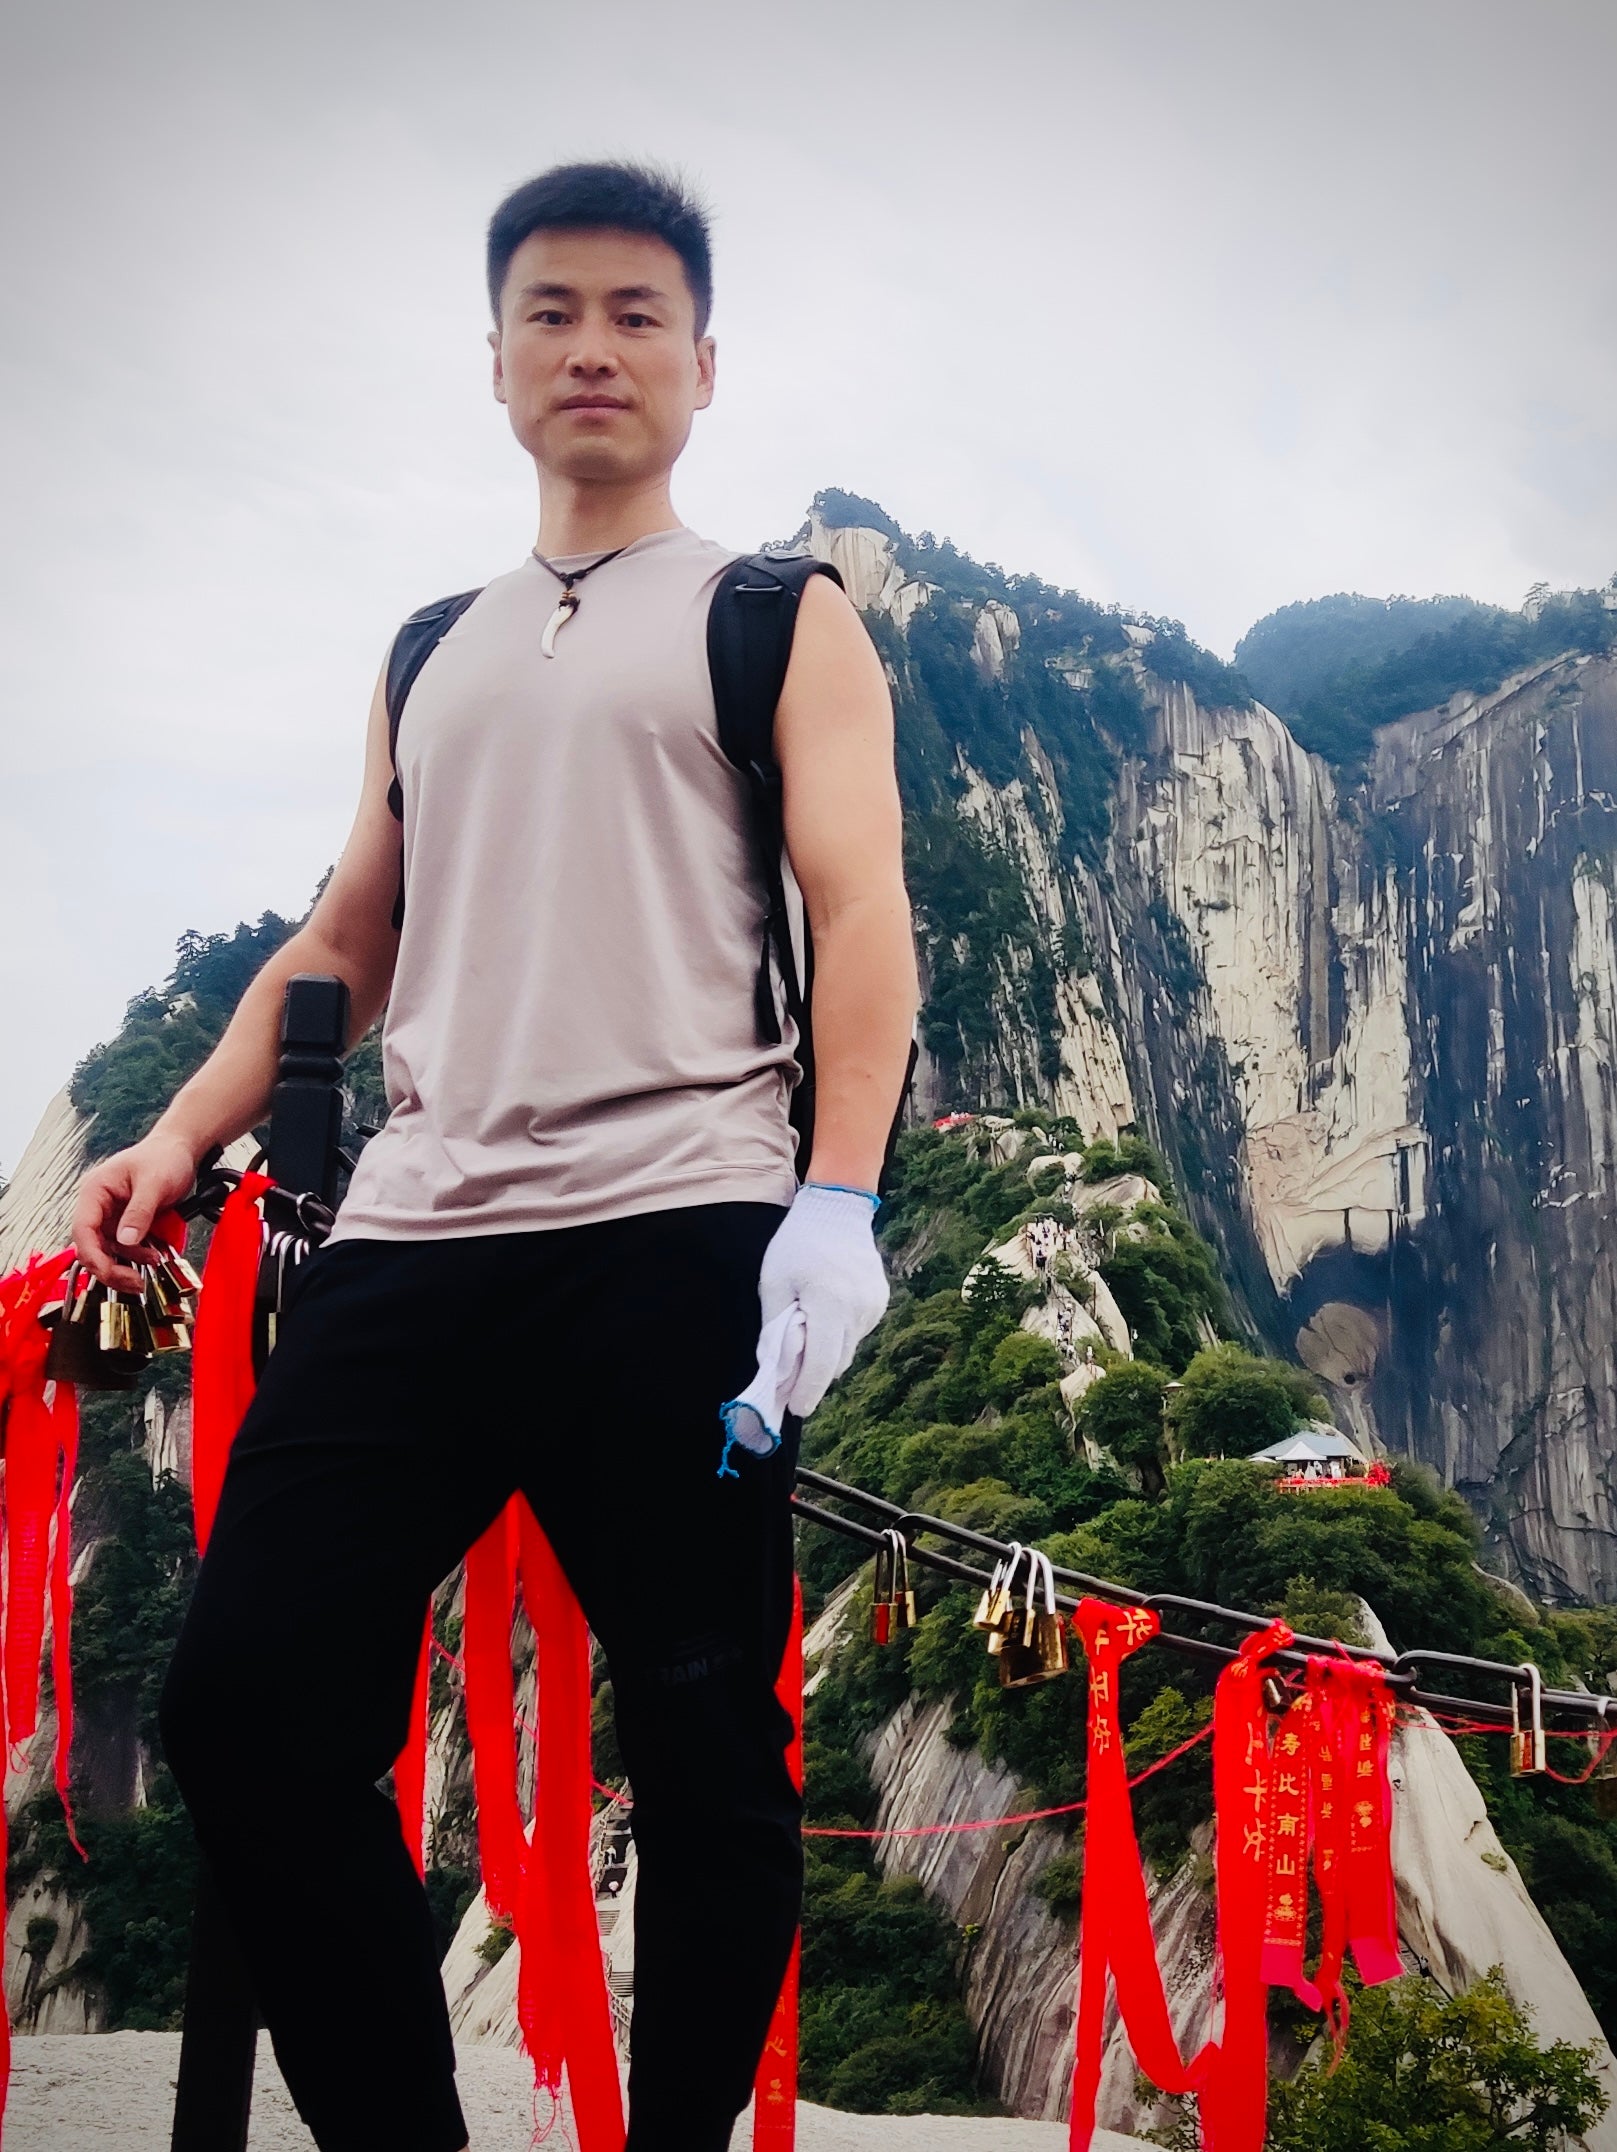 Tao Guo wearing beige shirt and black pants while standing on top a mountain